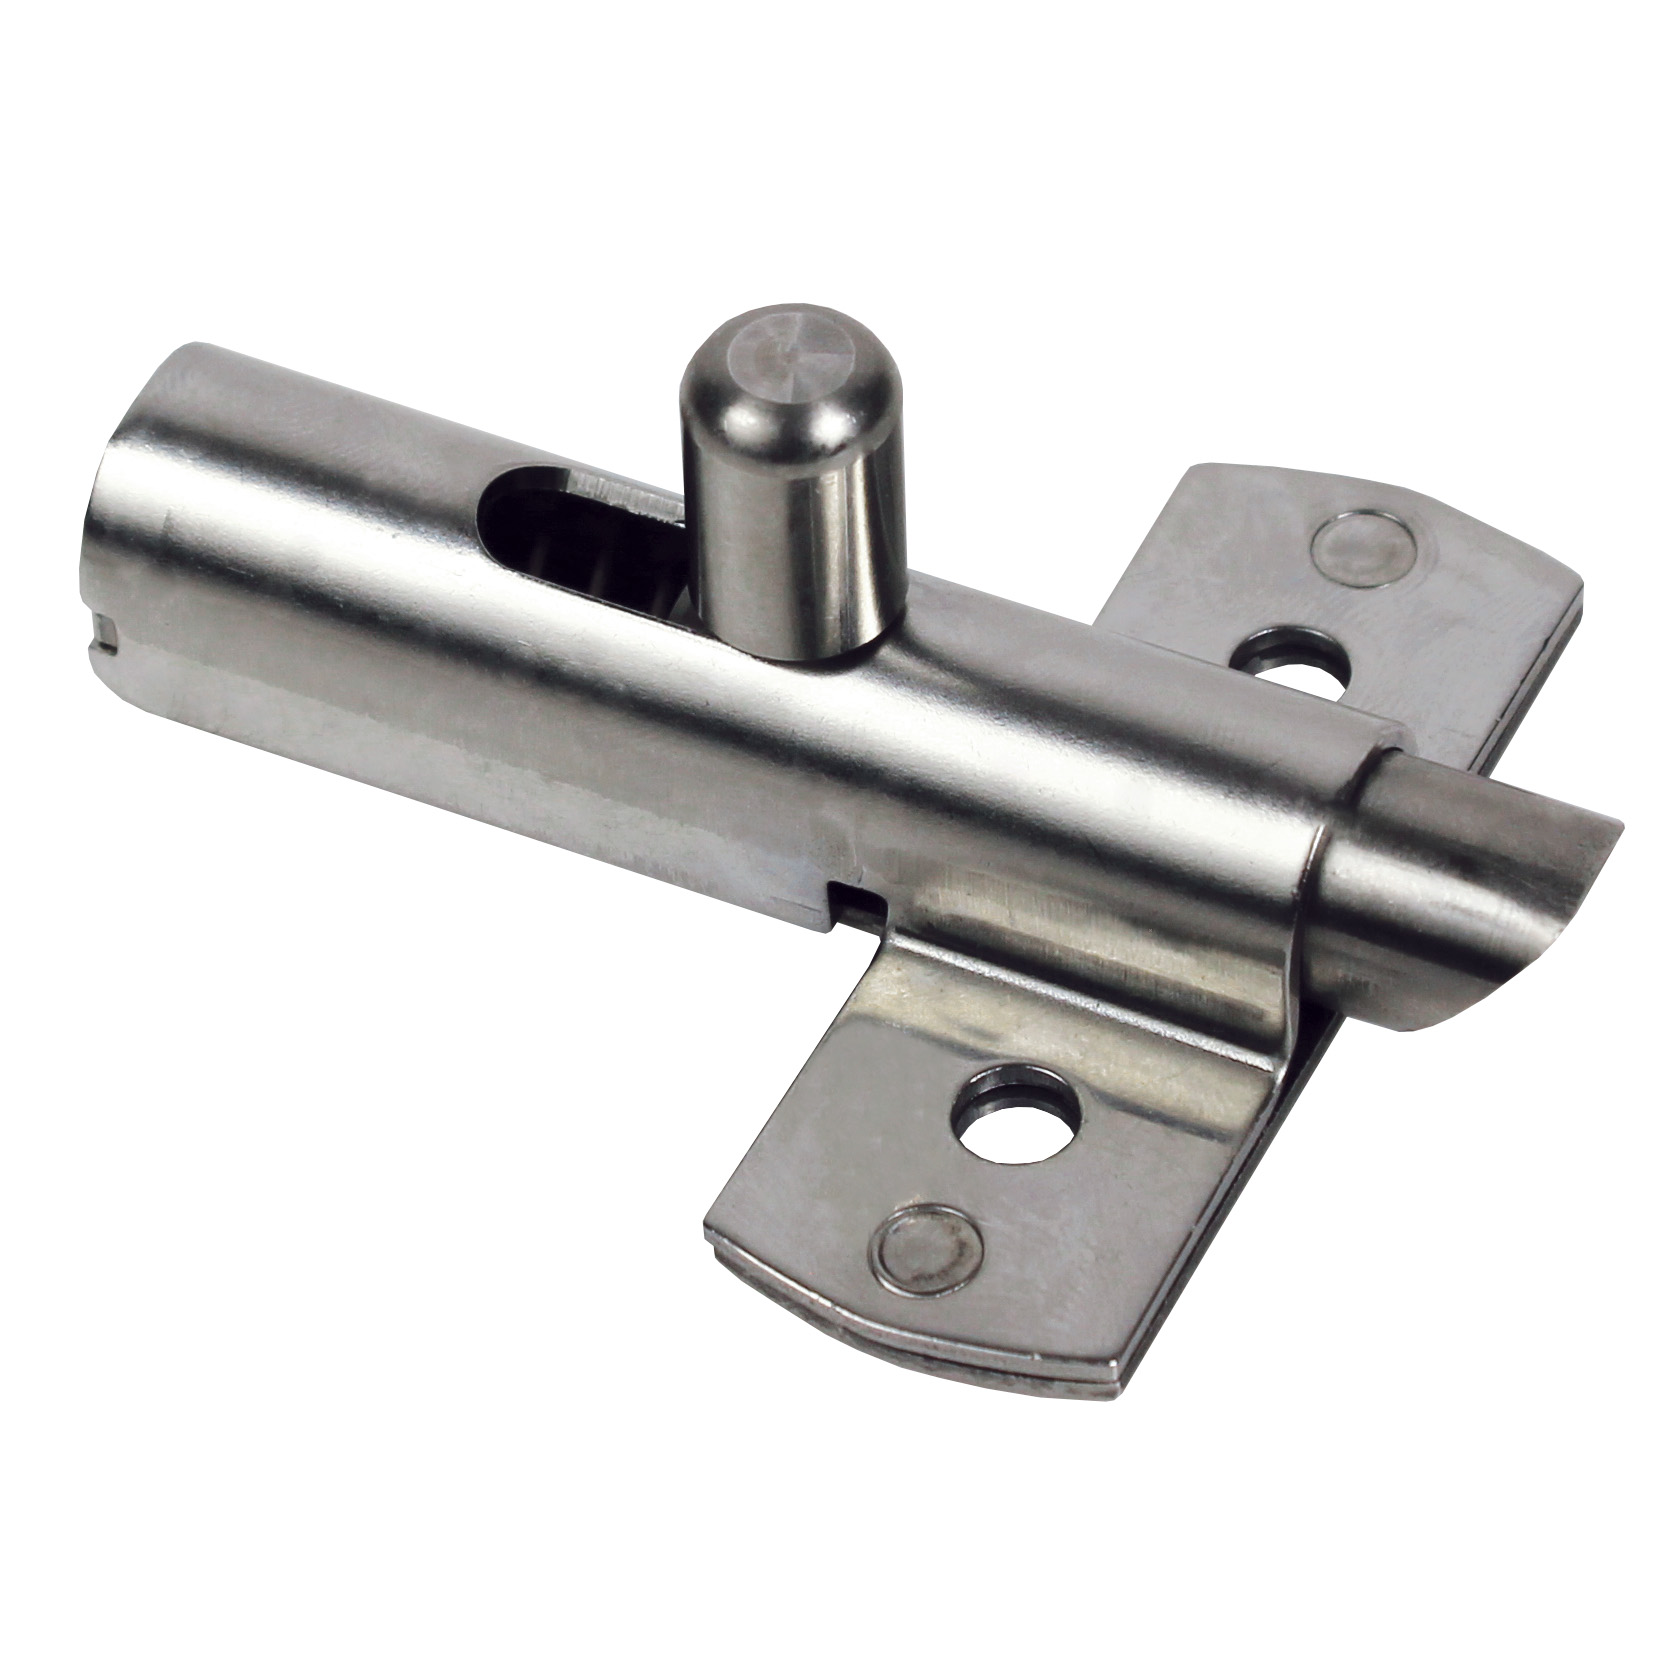 Latch - Spring loaded latch - stainless steel -  - 